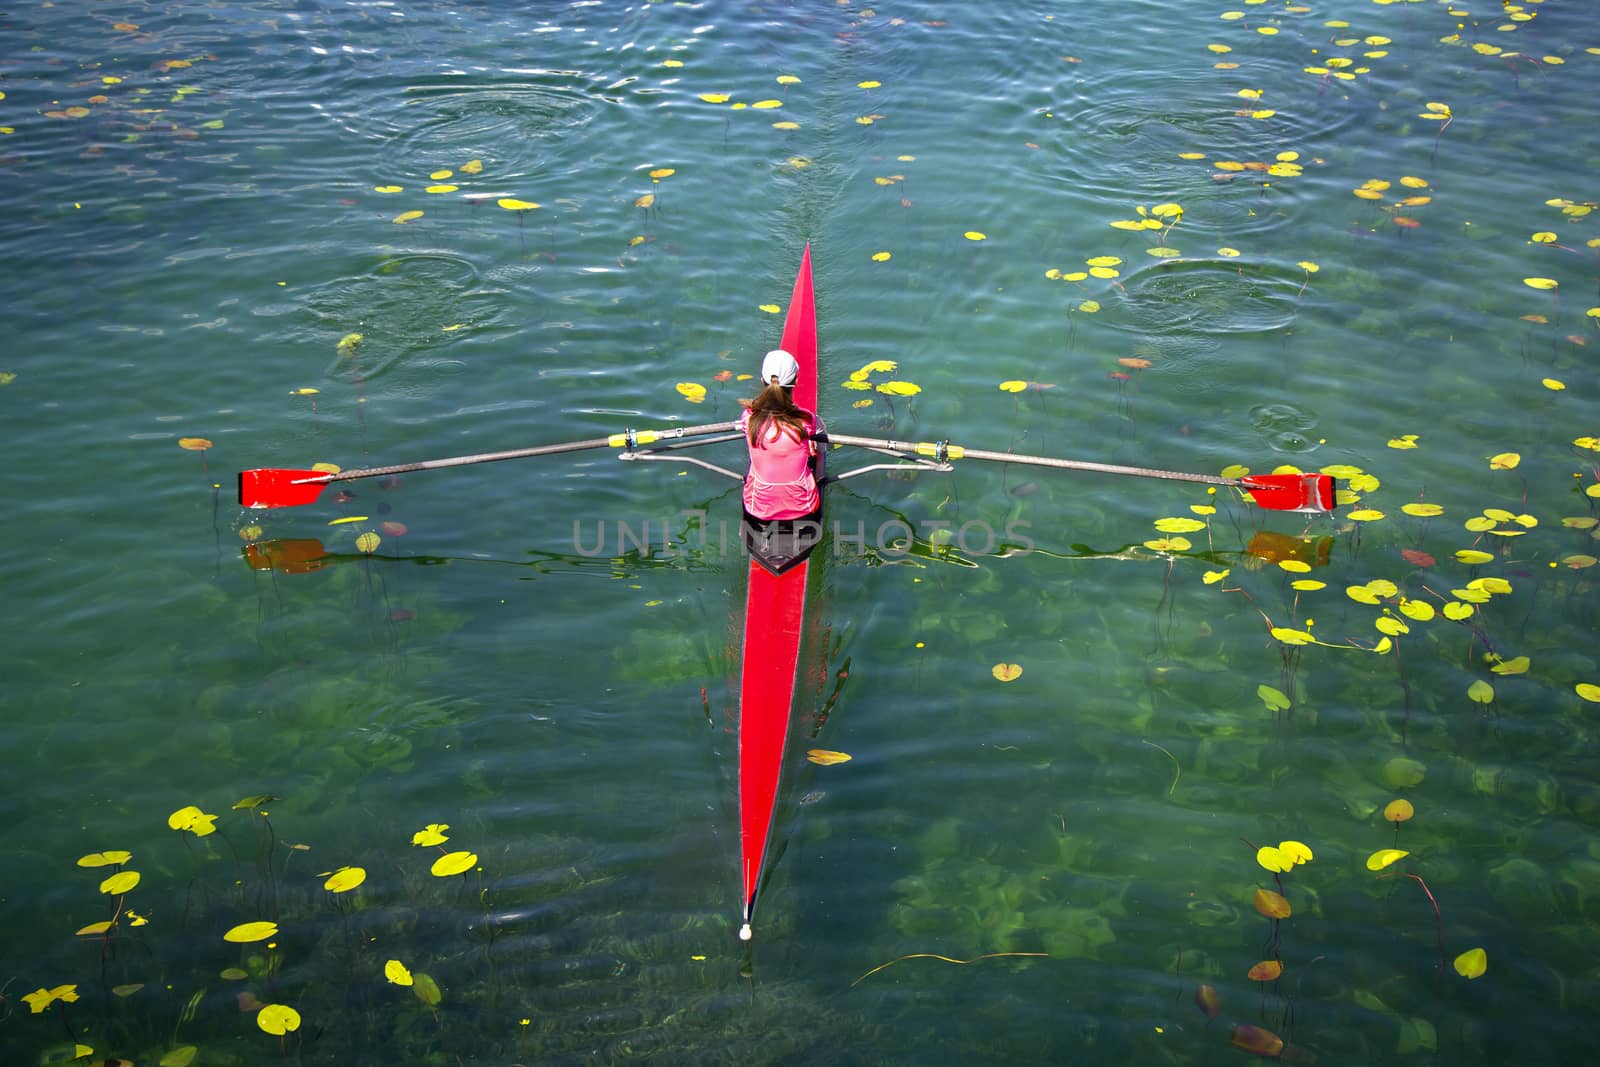 Woman Single sculls rower during the start of a rowing on the tranquil lake